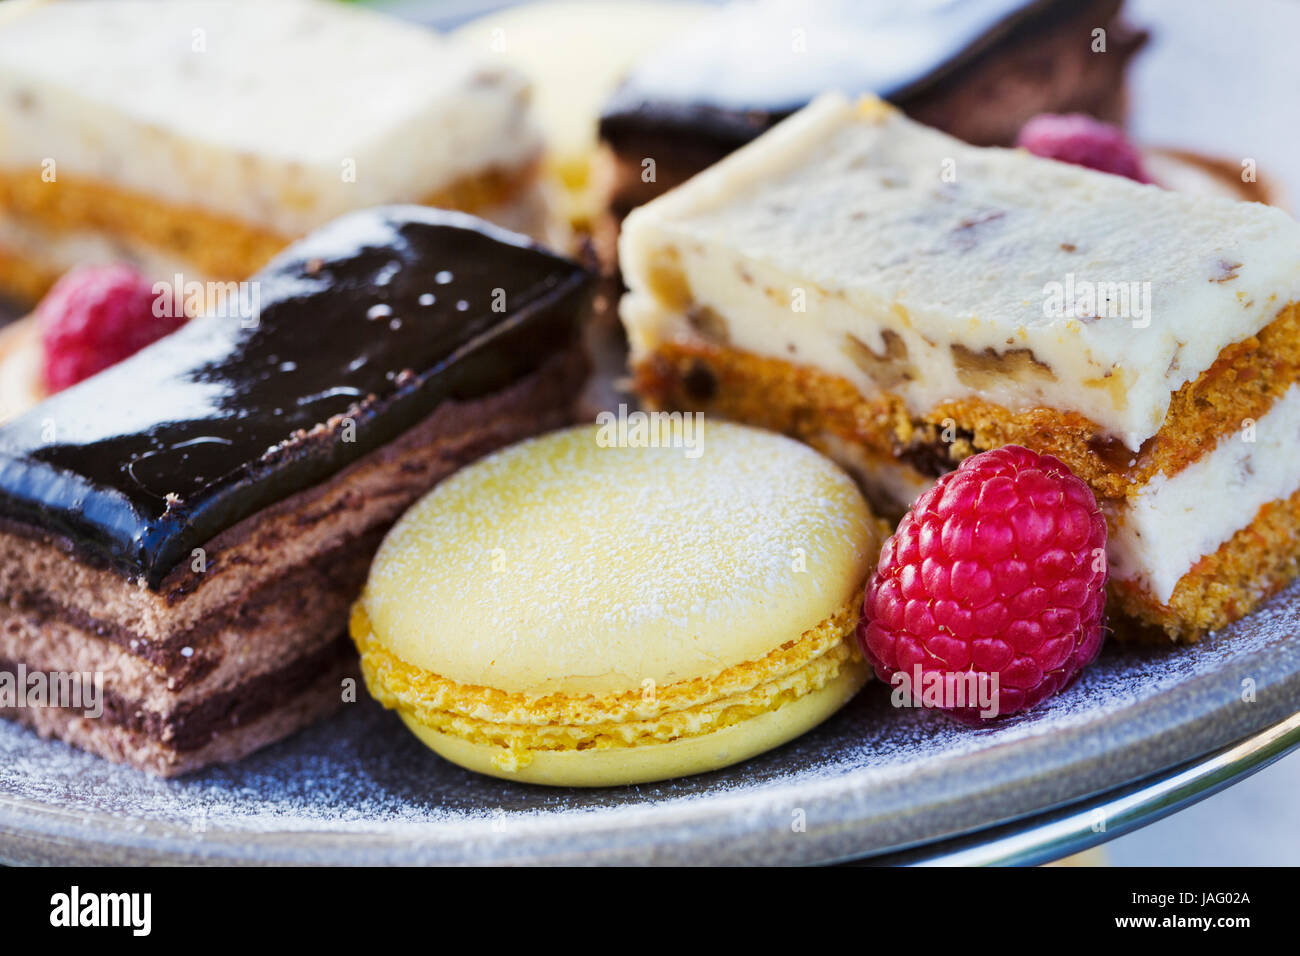 Close up of a selection of cakes, a cream slice and a macaroon and a raspberry on a plate, traditional afternoon tea. Stock Photo